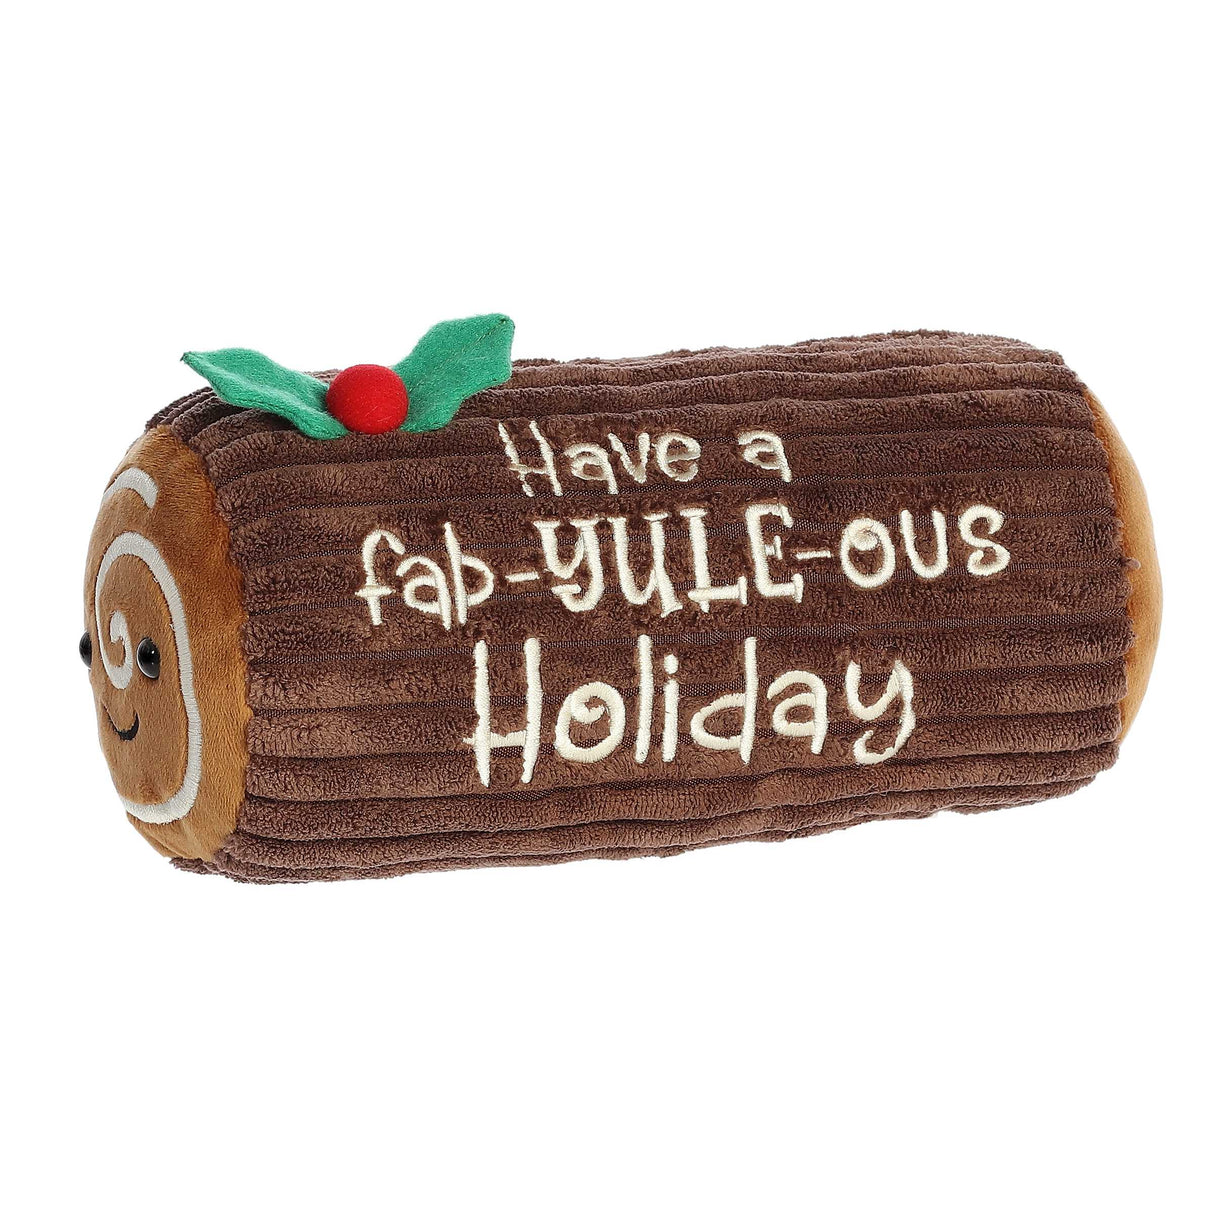 Fab-Yule-Ous Holiday